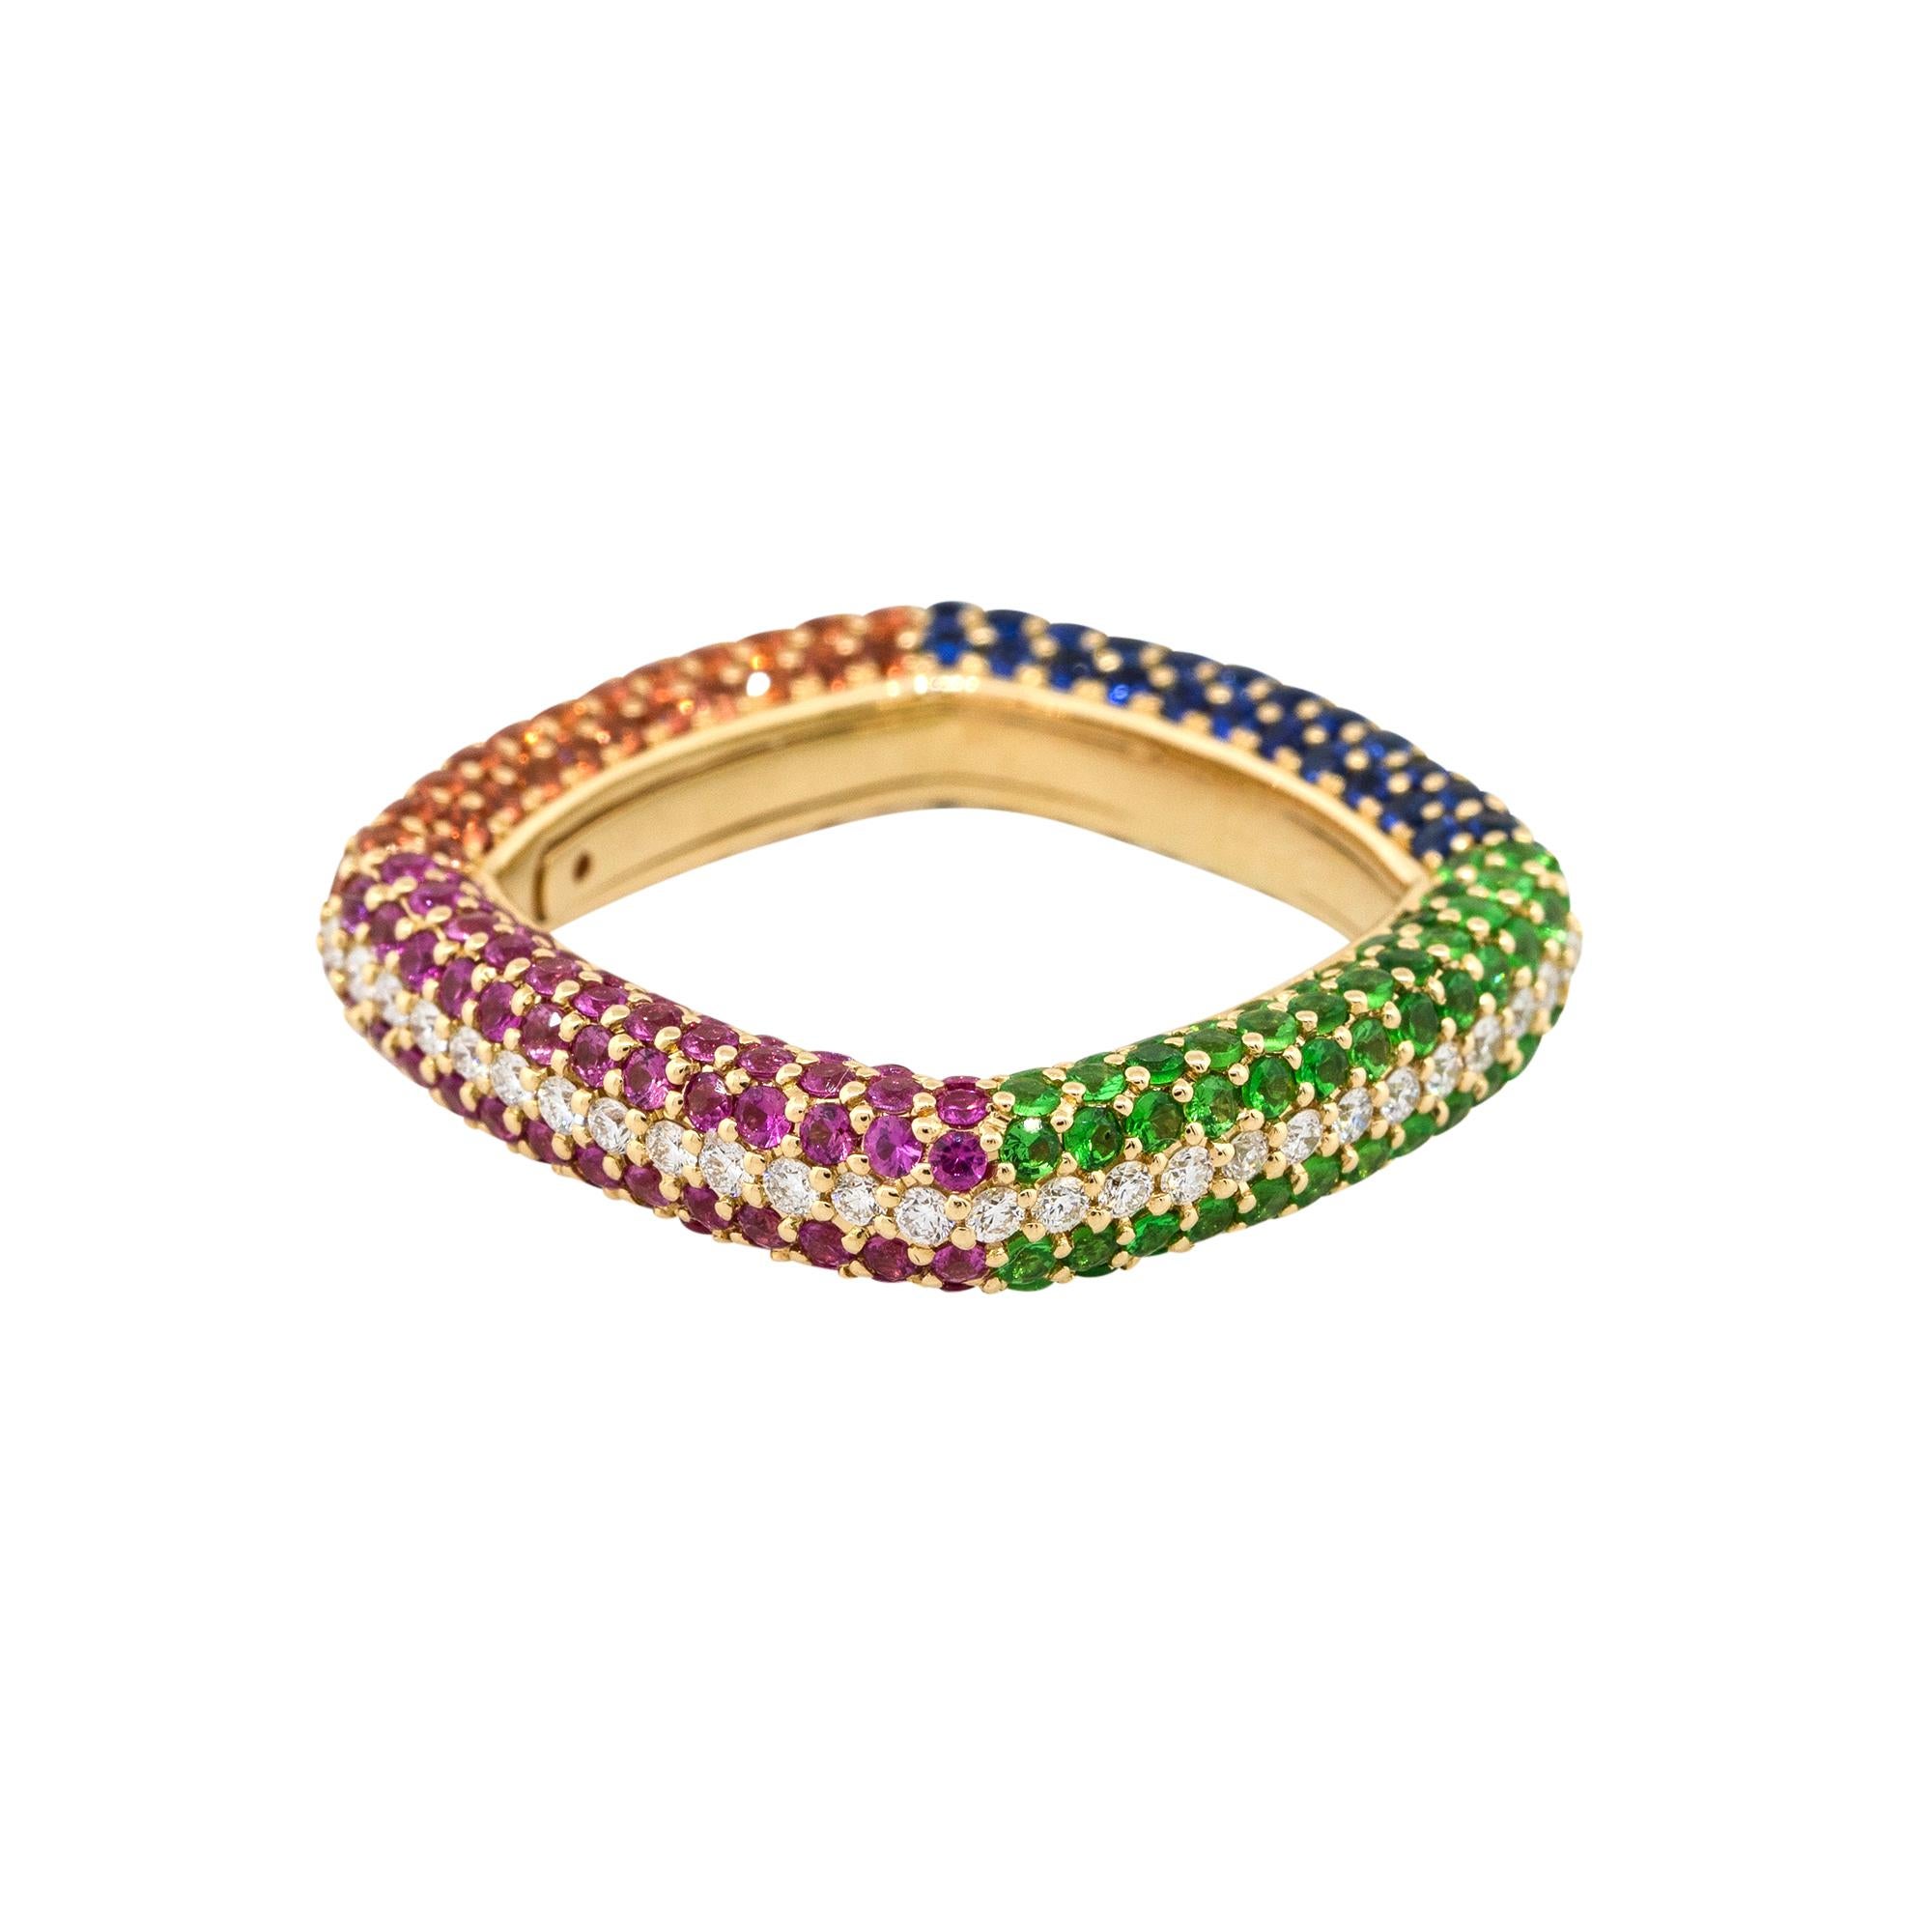 Material: 18k Yellow gold
Diamond details: Approx. 0.50ctw of round cut diamonds. Diamonds are G/H in color and VS in clarity
Gemstone details: Approx. 0.85ctw of round cut sapphires Approx. 2.46ctw of round cut pink sapphires
Ring Size: 6.5 
Total